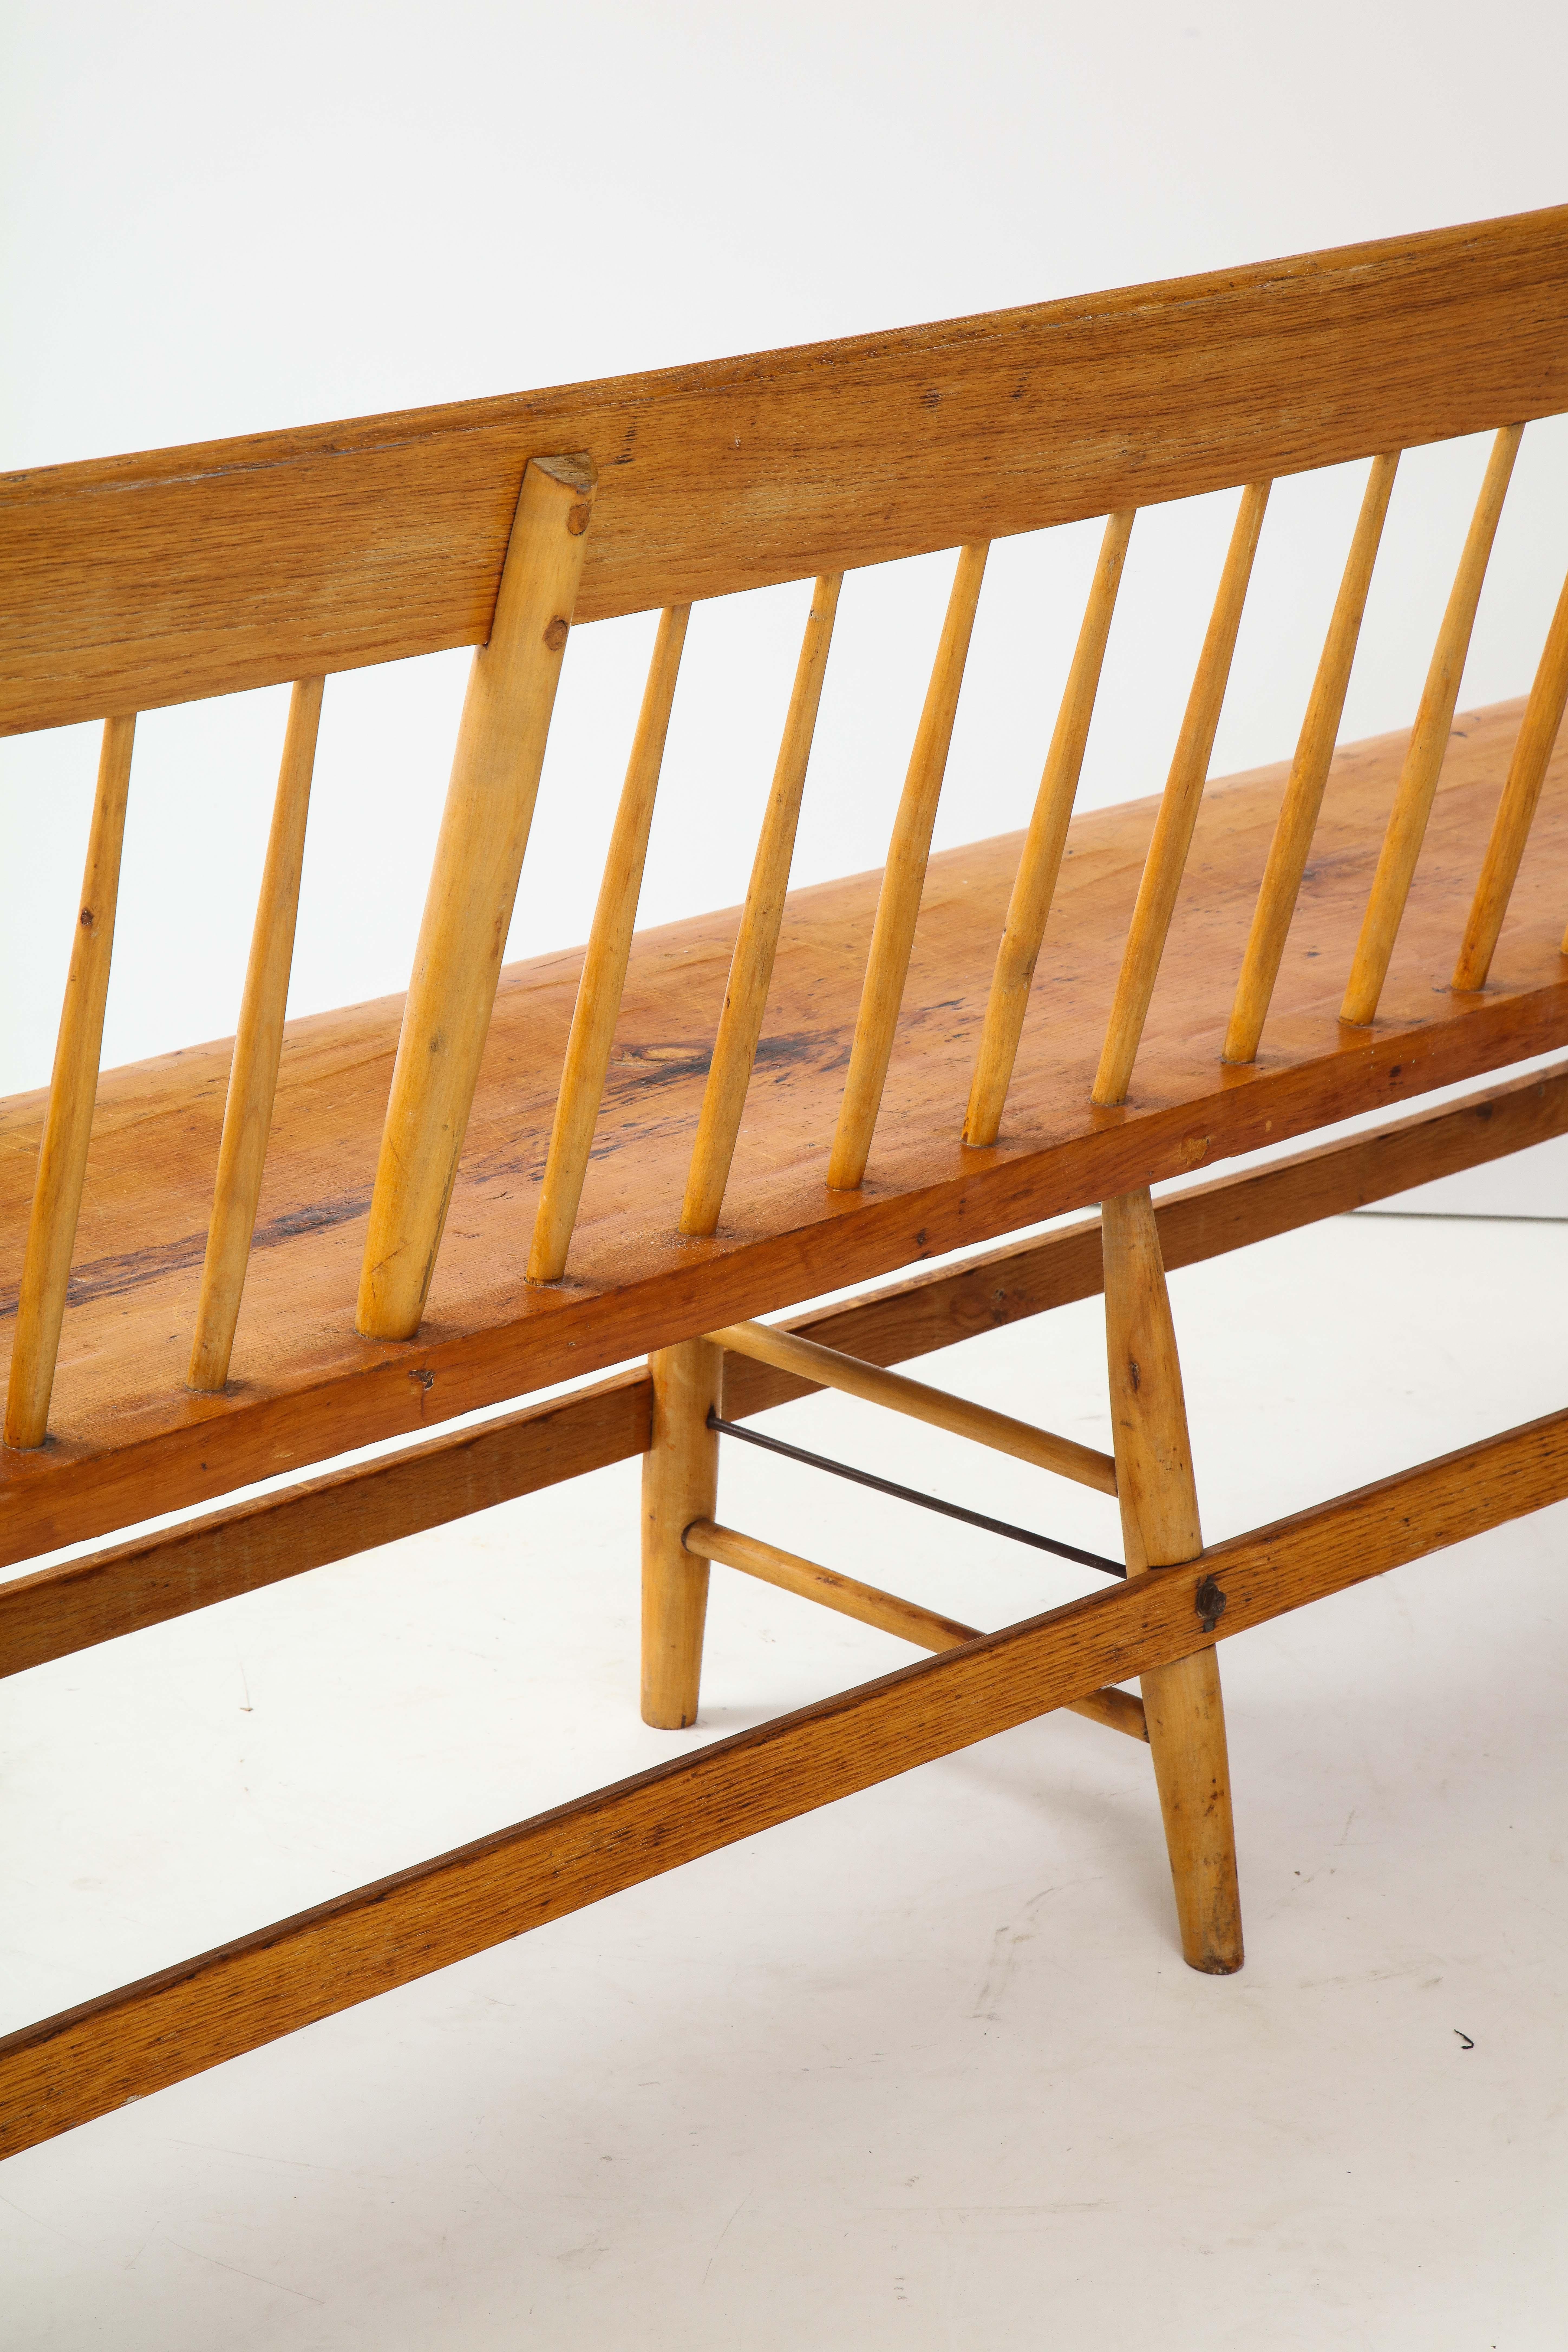 Exceptional 19th C. Hand Made Quaker Meeting House Bench, New England/Cape Cod 6